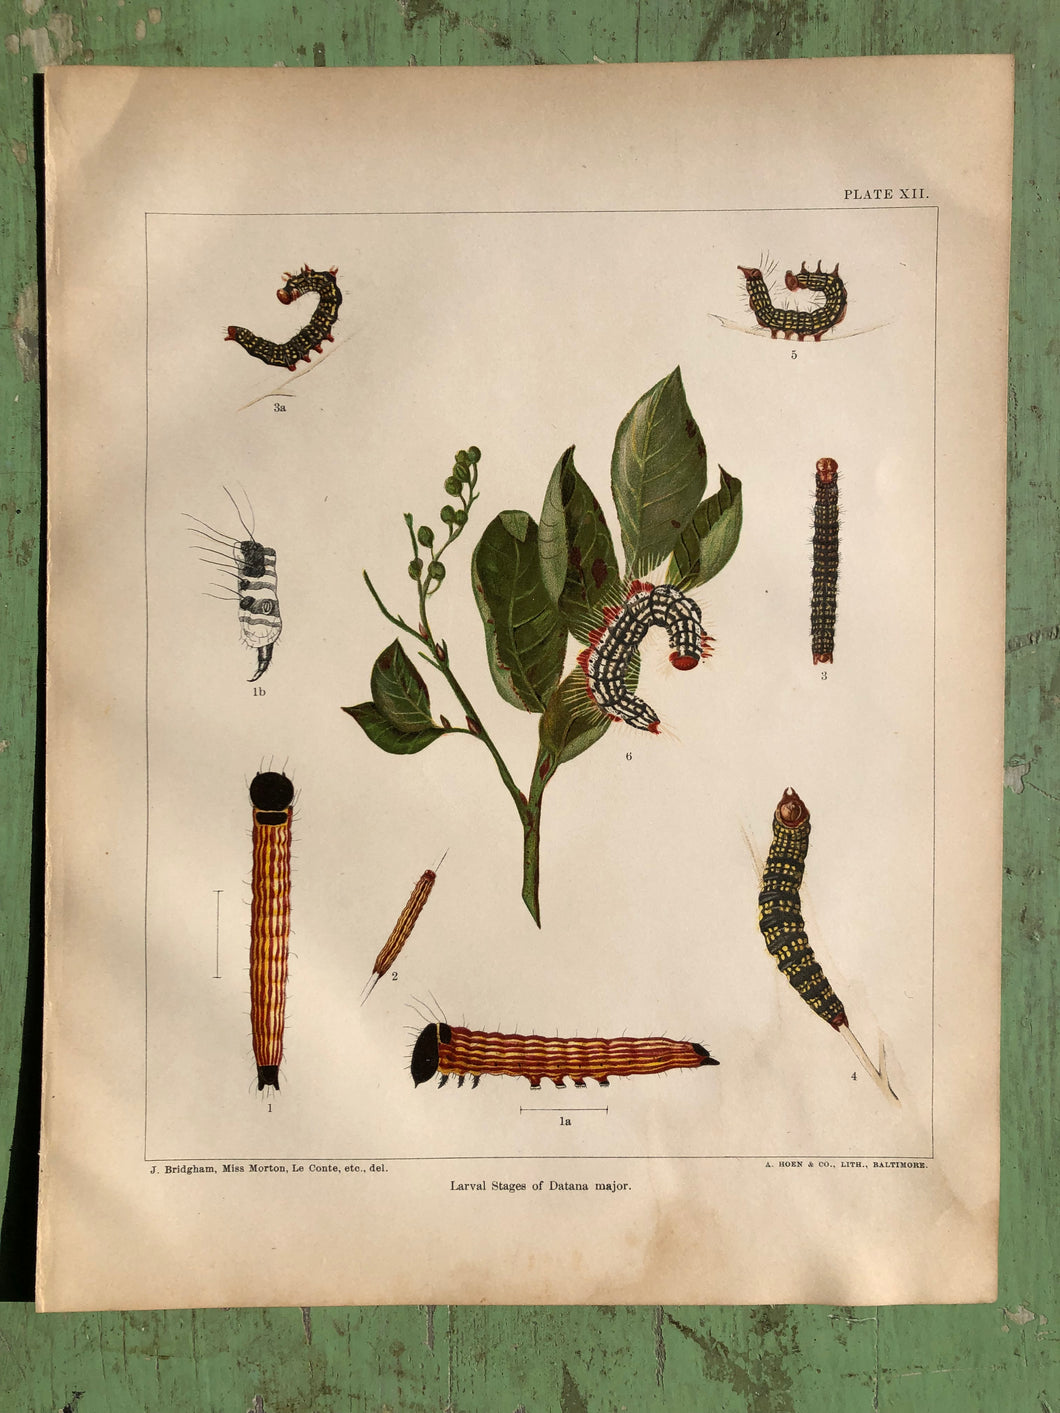 Plate XII from 